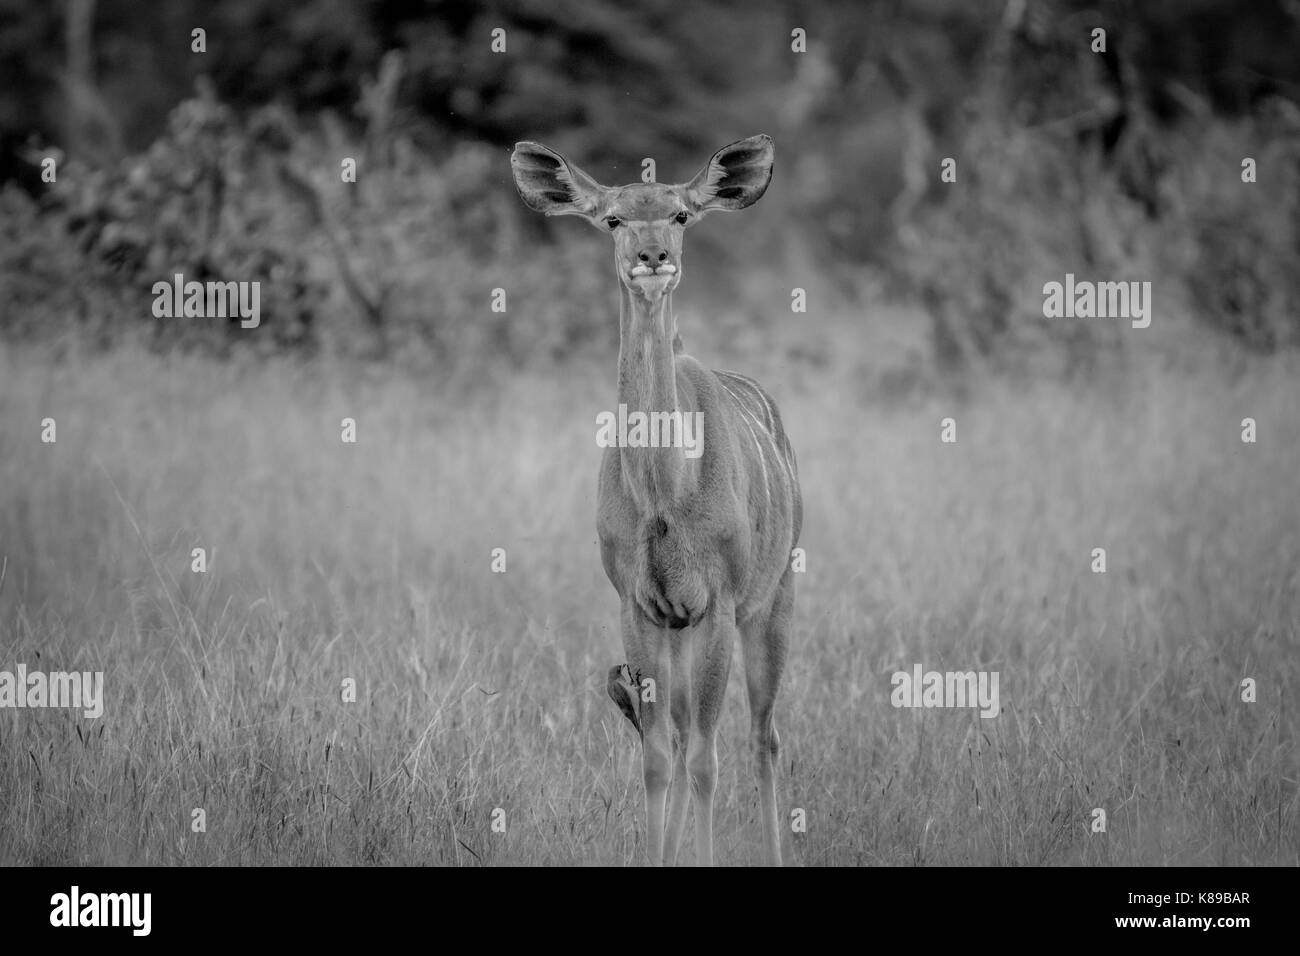 Female Kudu standing in the grass and being curious in black and white in the Hwange National Park, Zimbabwe. Stock Photo